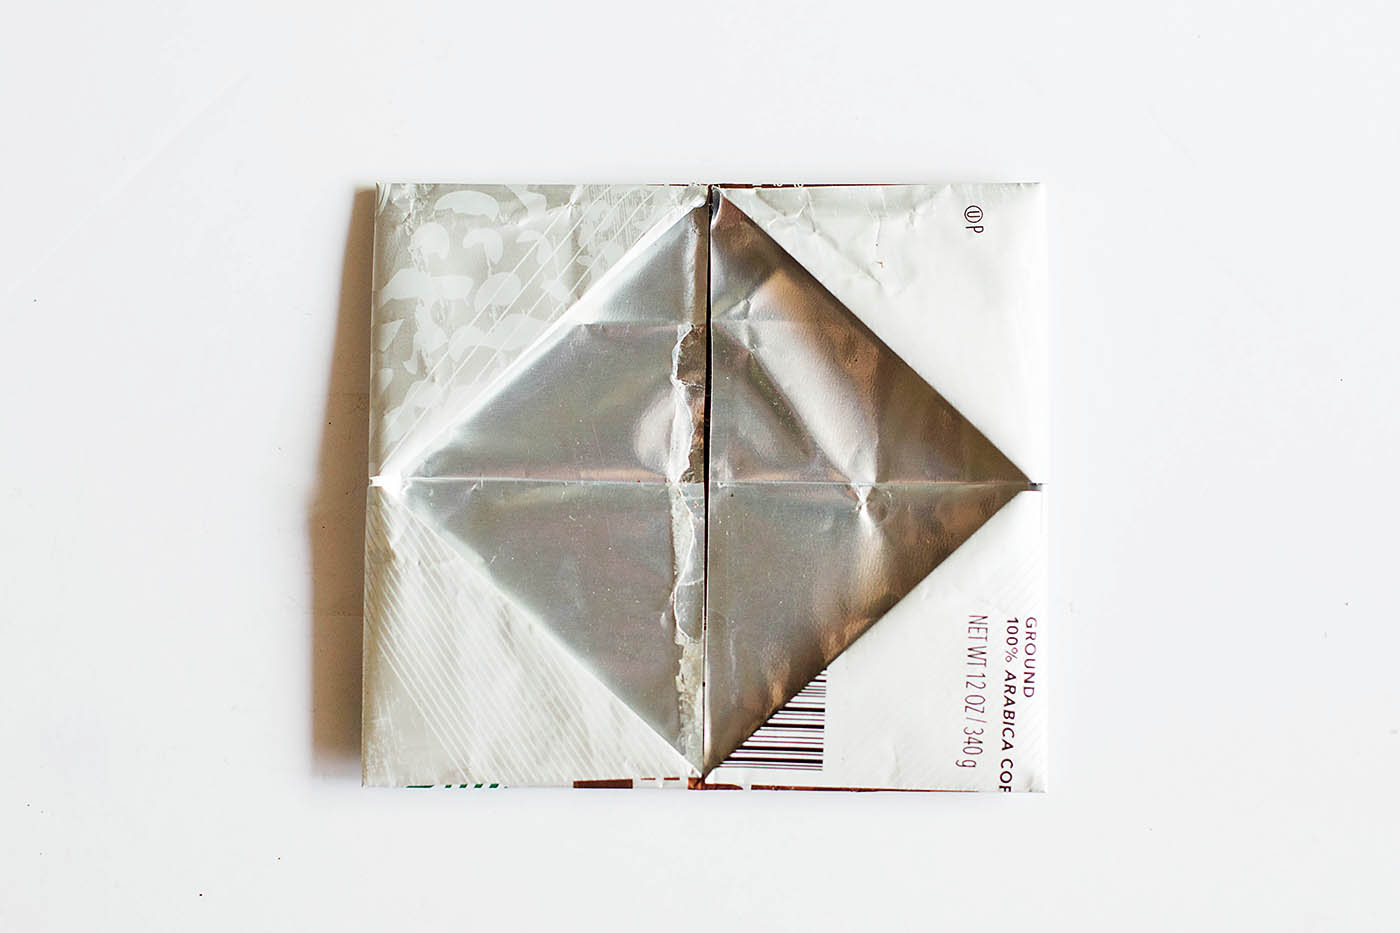 DIY origami wallet from a coffee bag!